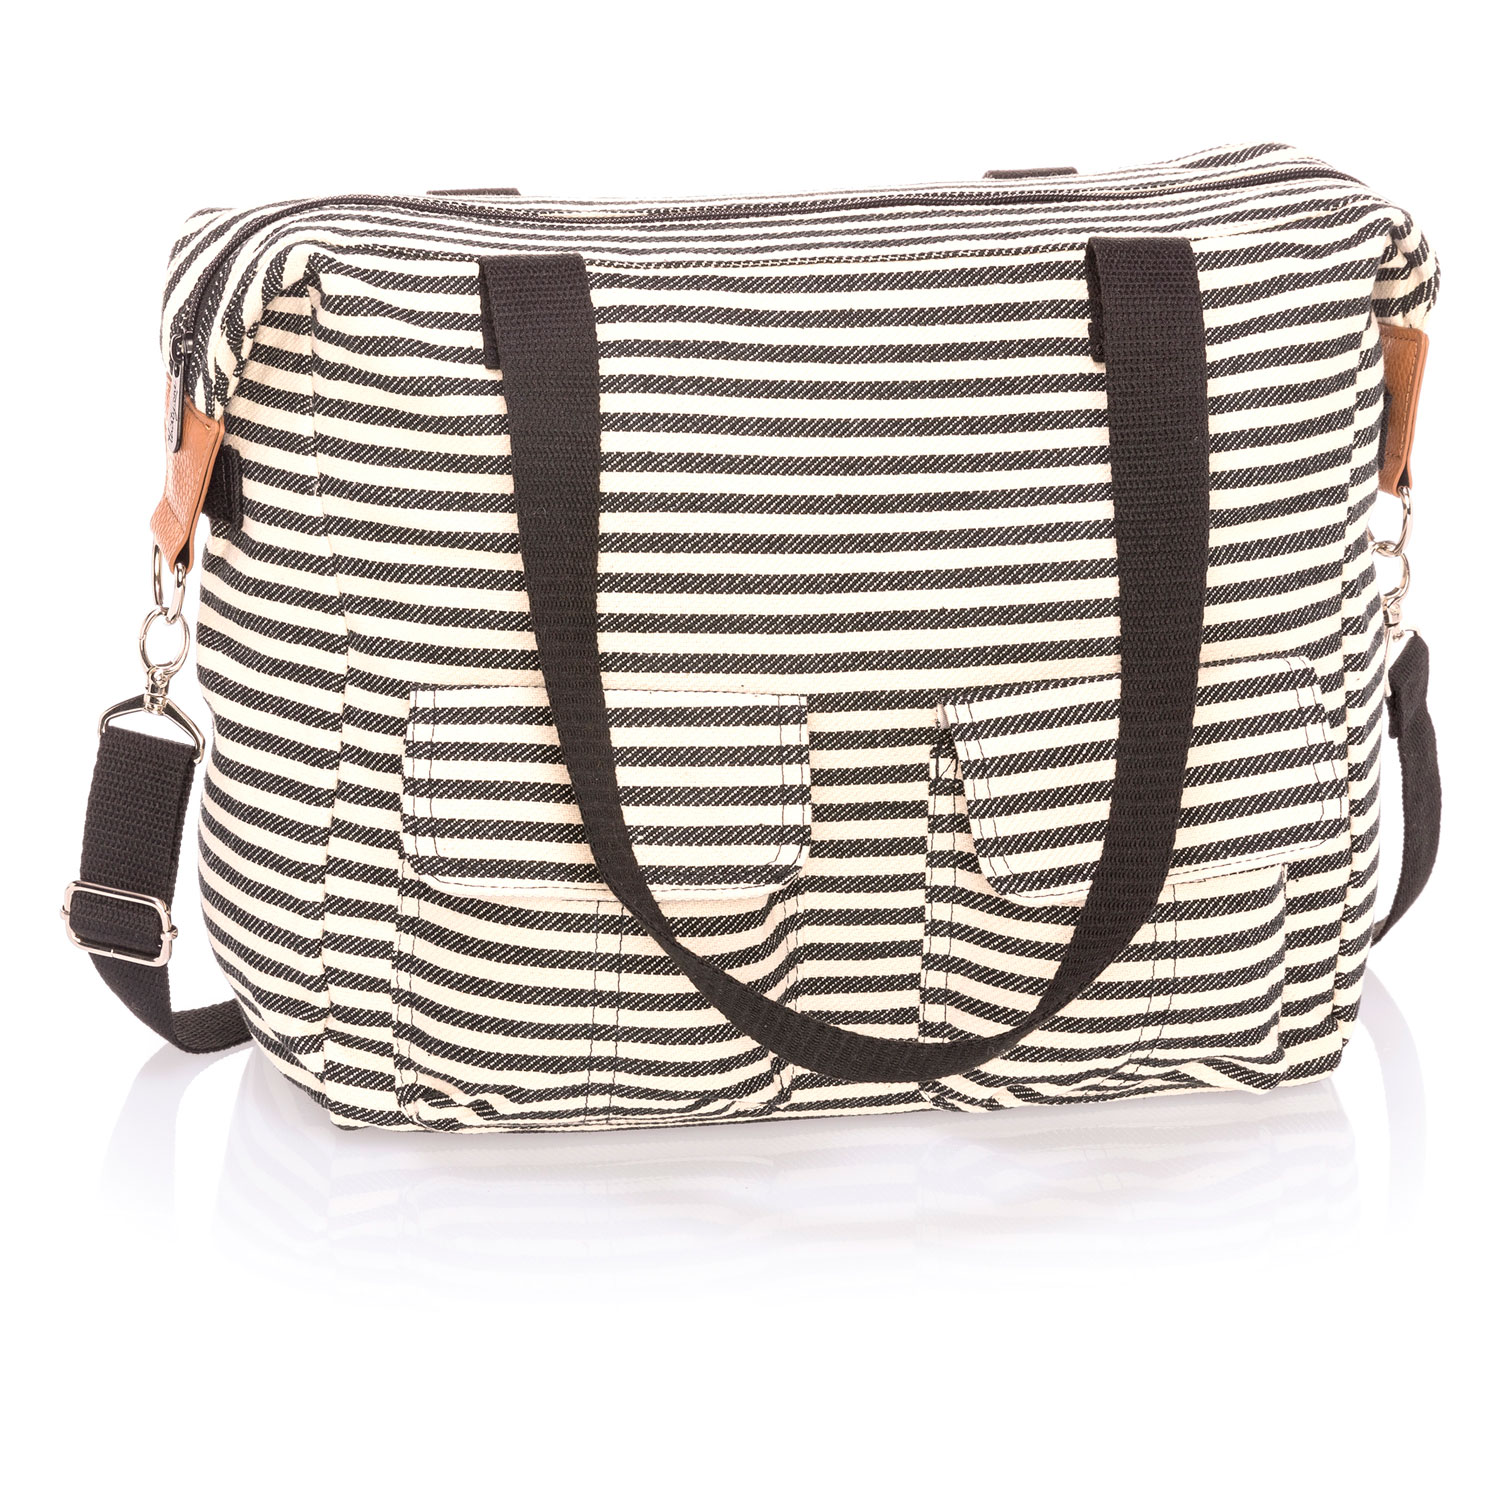 Twill Stripe Casual Cargo Bag Thirty One Ts Affordable Purses Totes And Bags